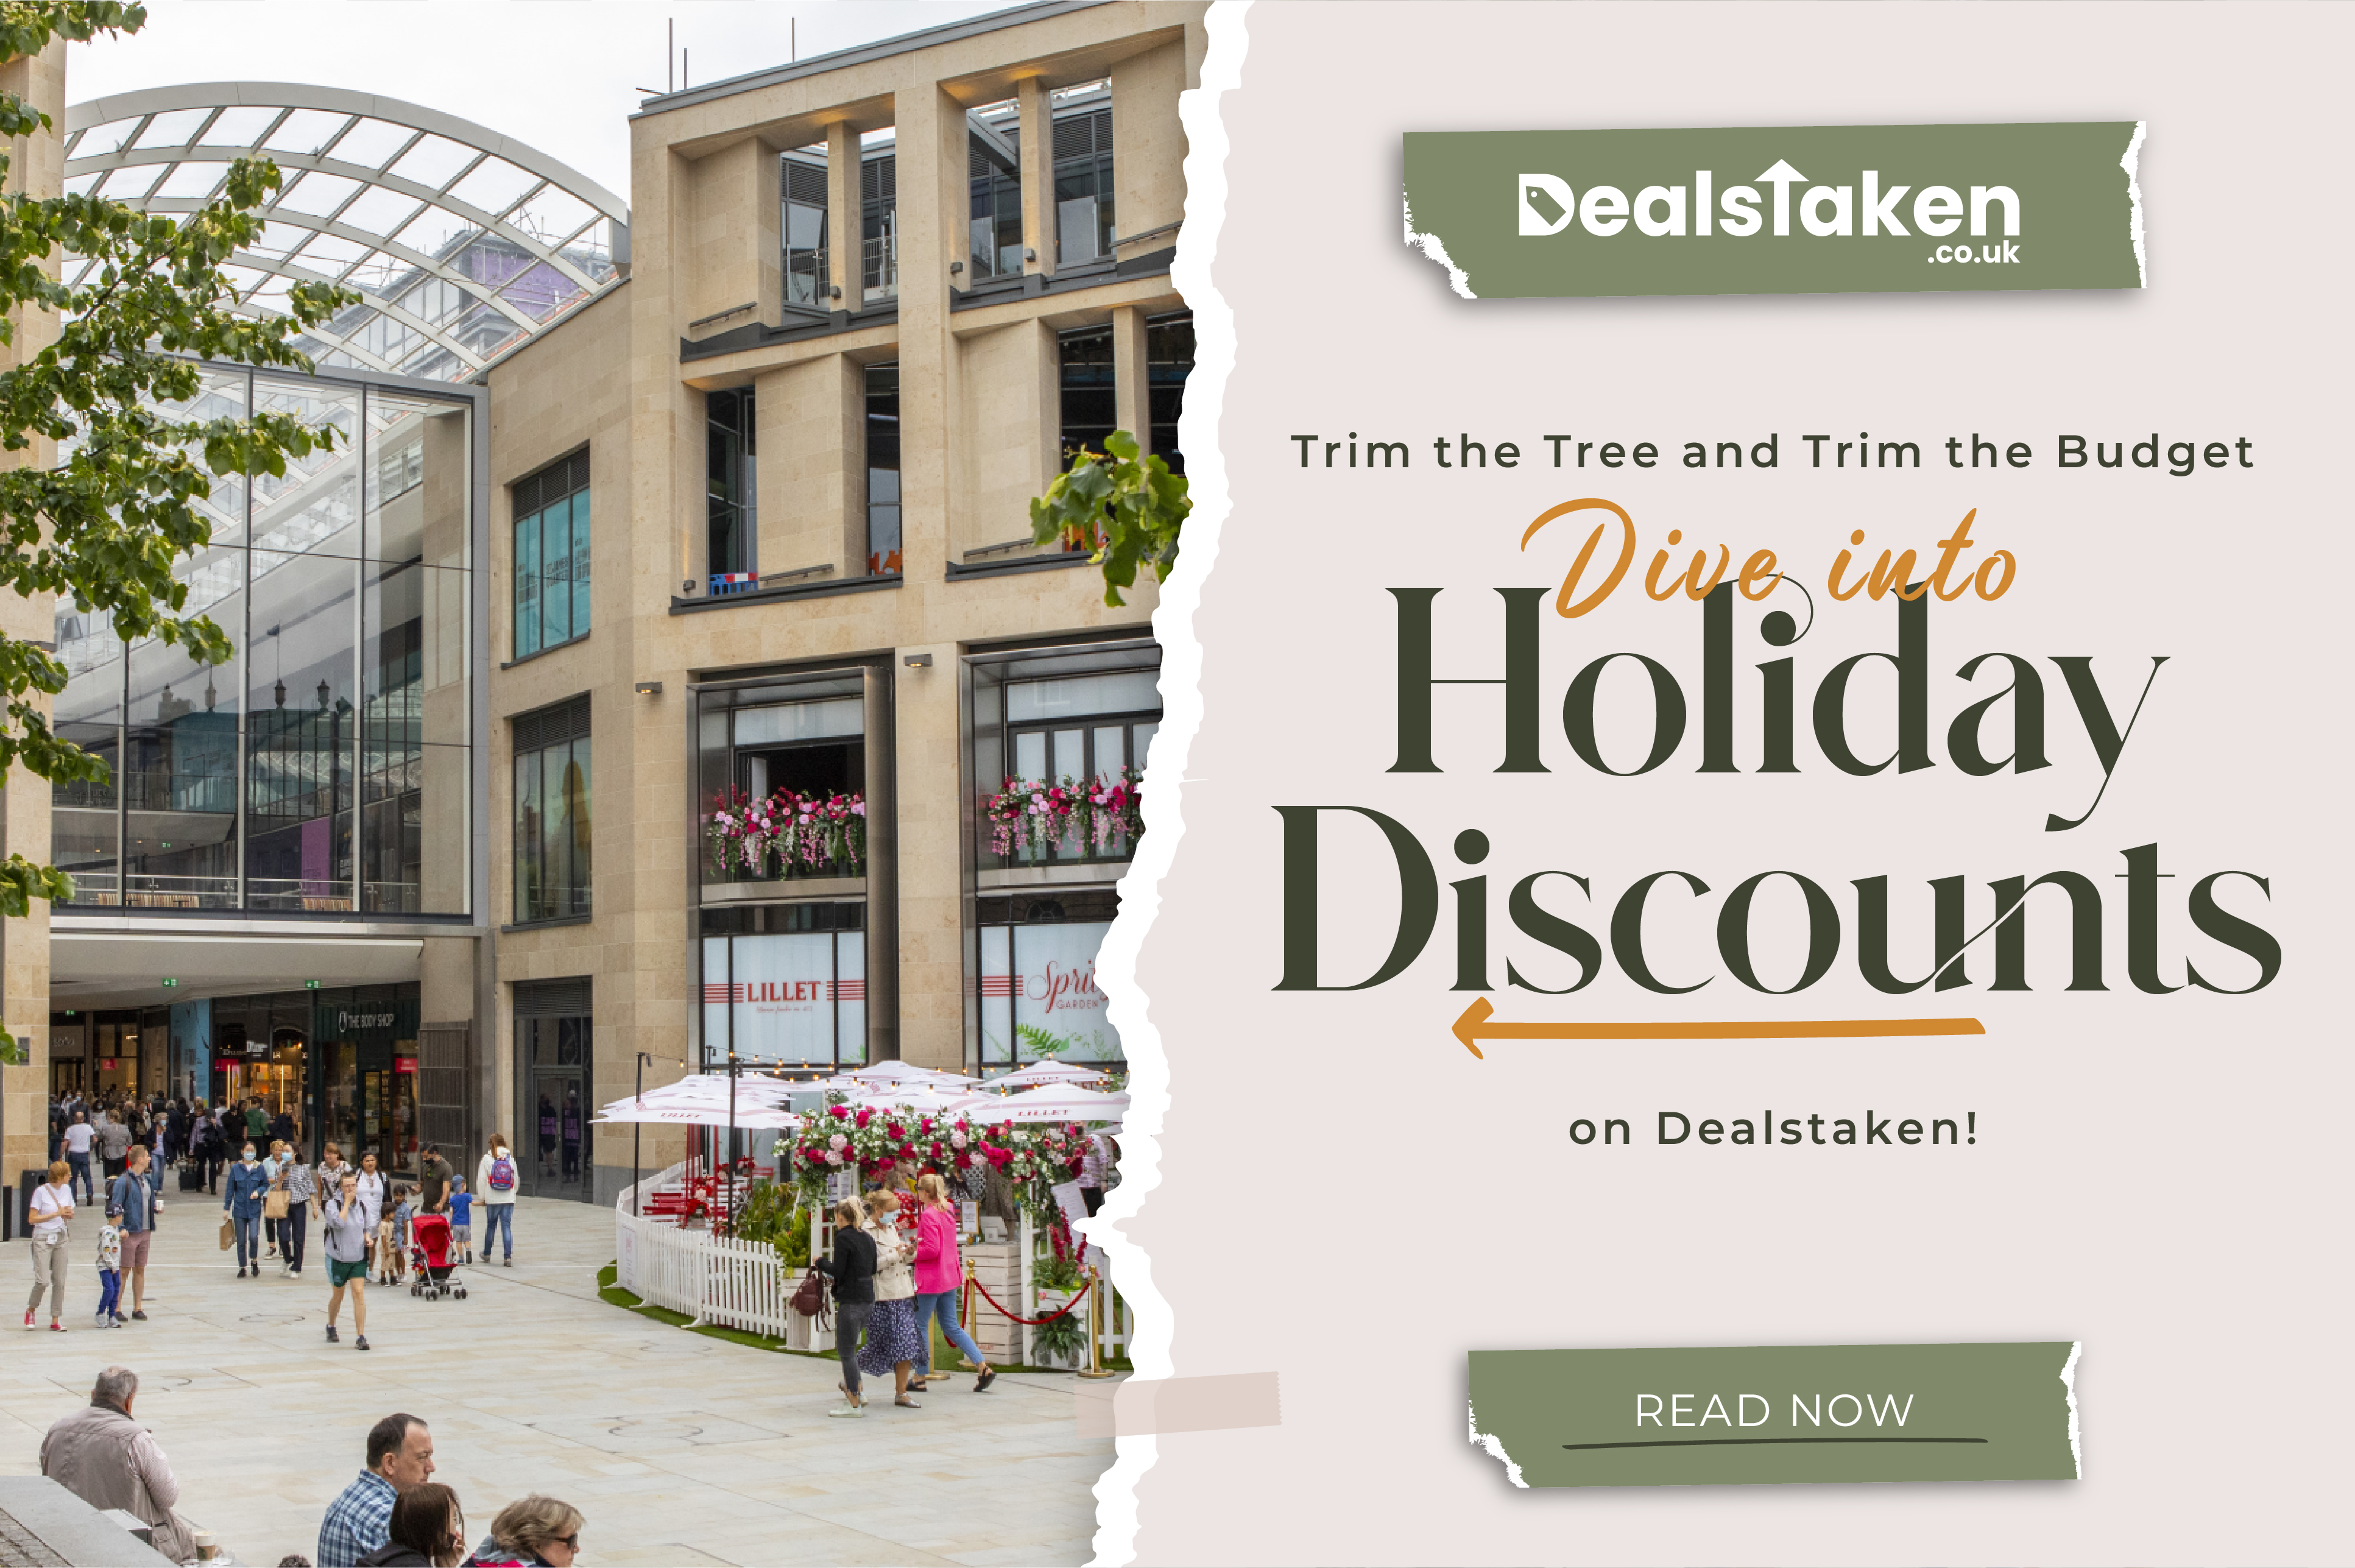 trim-the-tree-and-trim-the-budget-dive-into-holiday-discounts-on-dealstaken